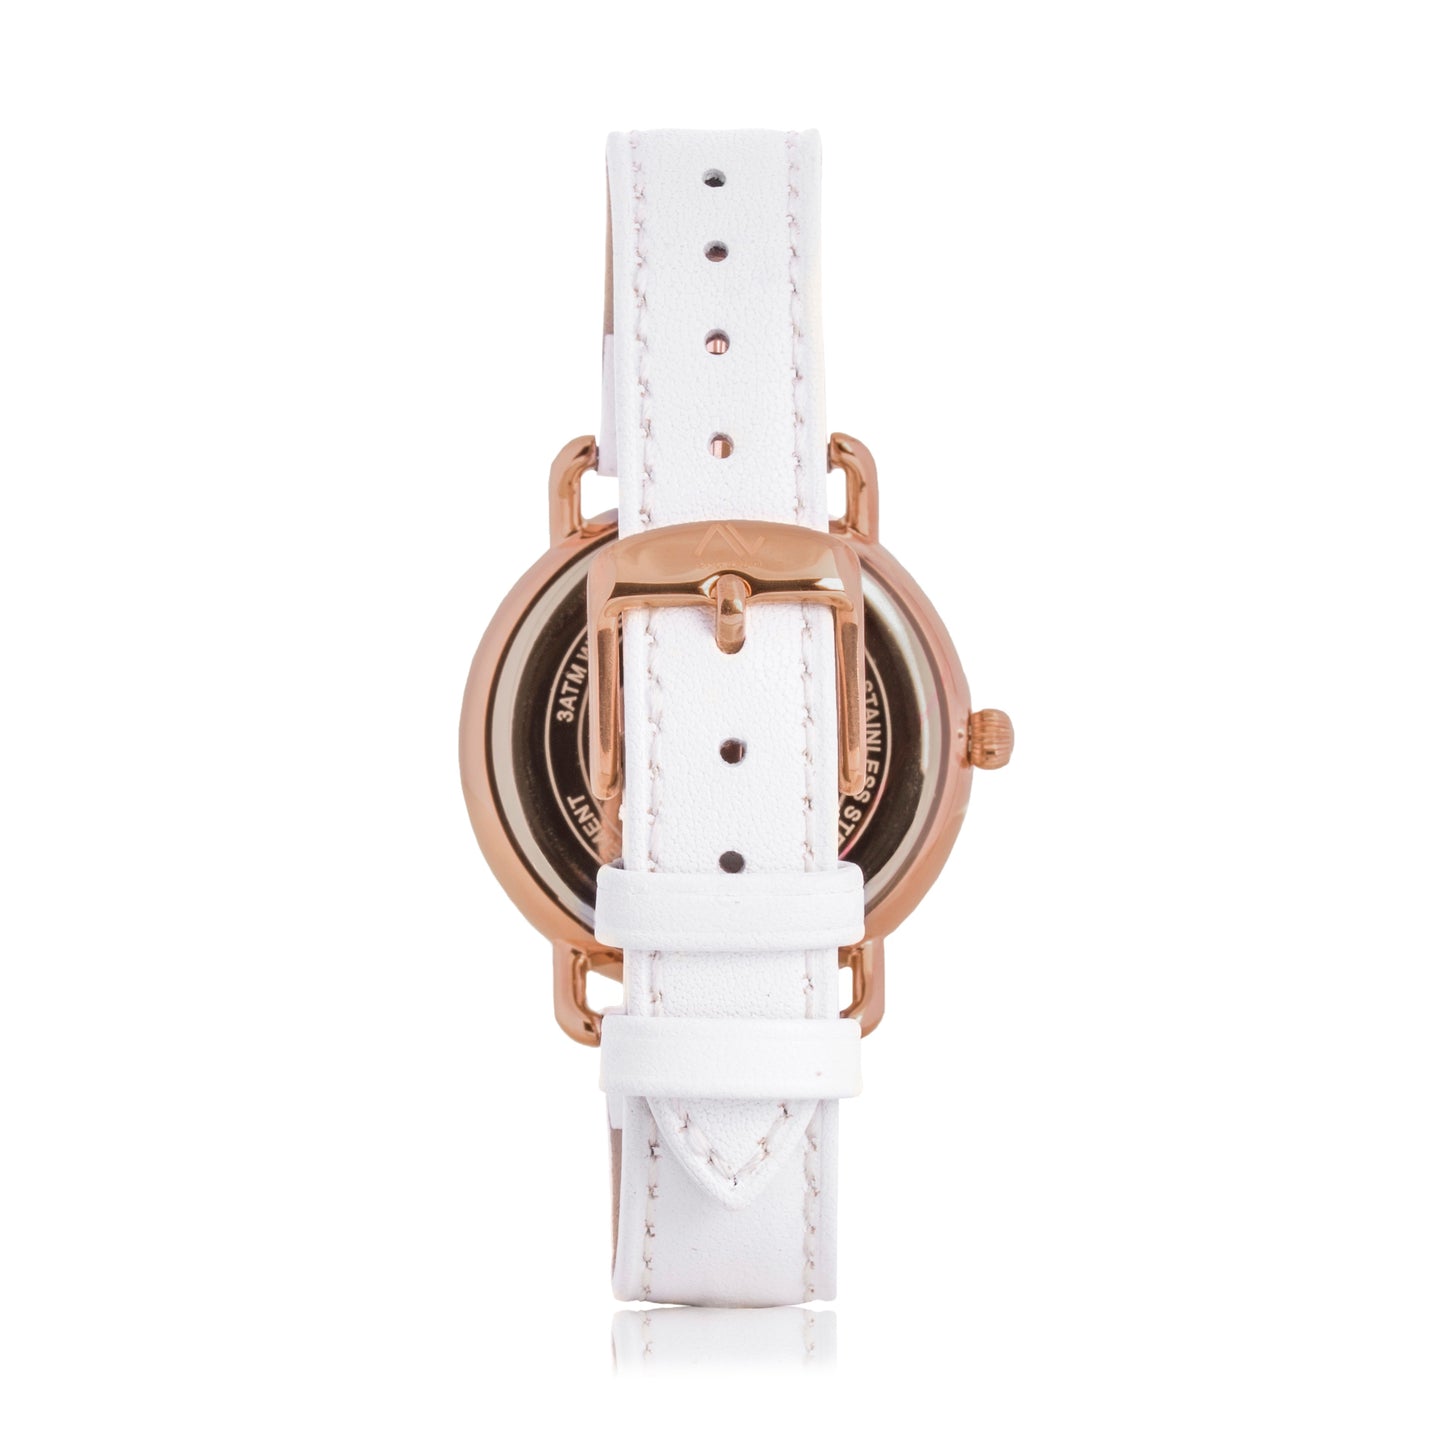 Adora London Watch white with white face